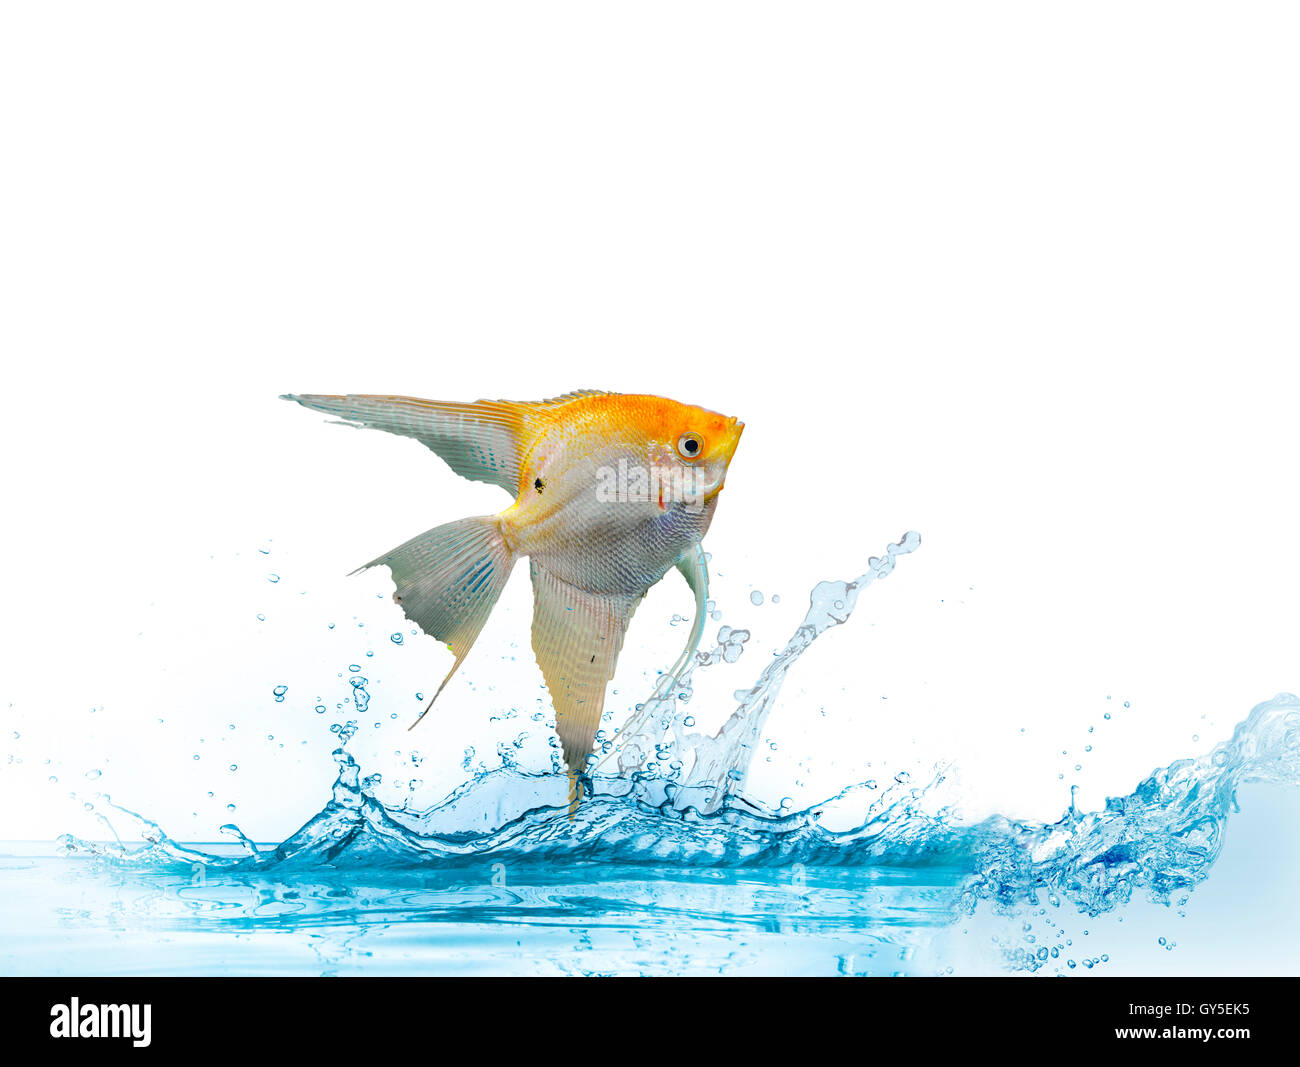 background with a portrait of the golden angel fish Stock Photo